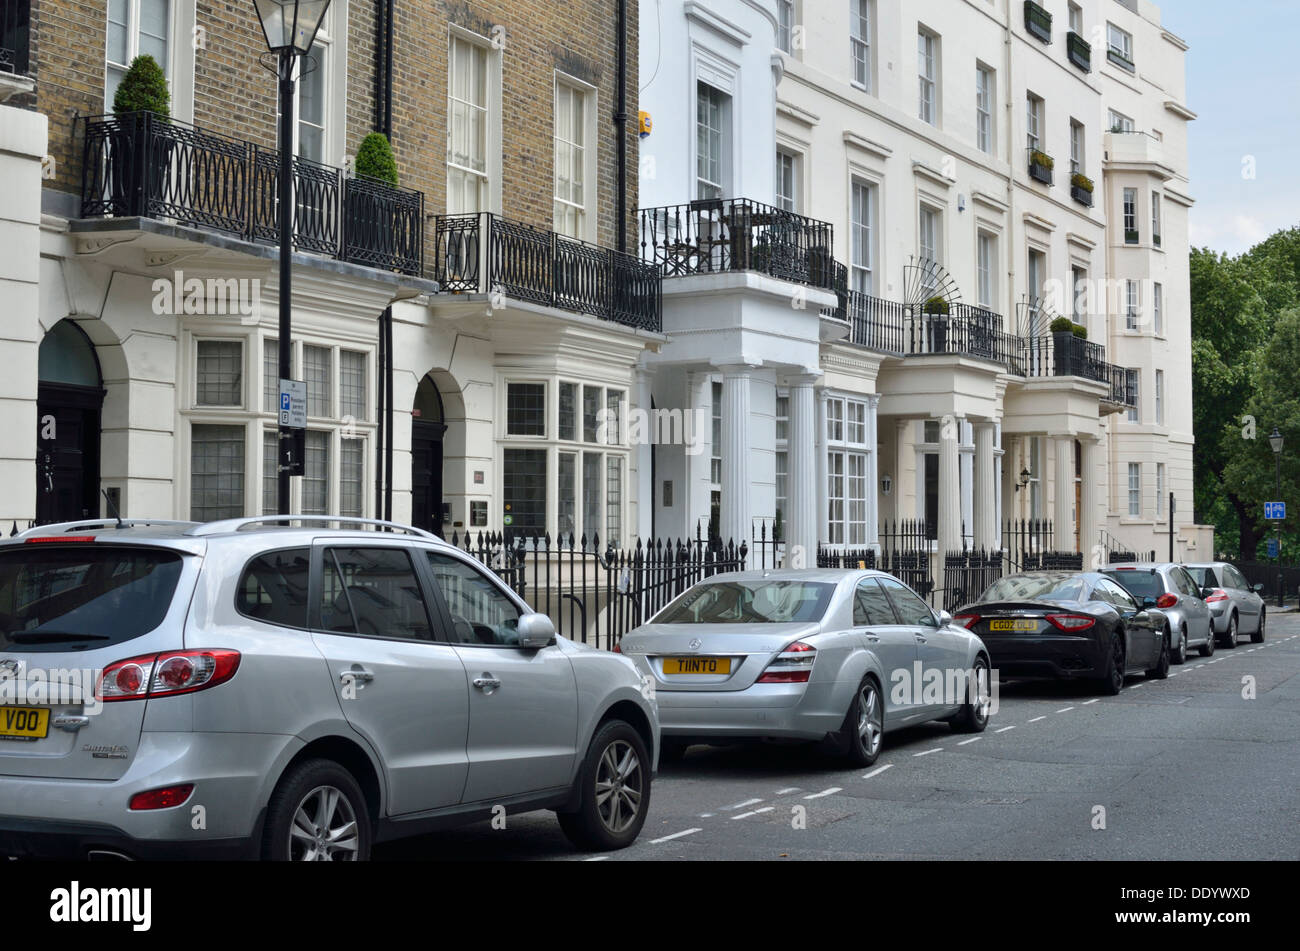 Stanhope Place W2, Marble Arch, London, UK. Stock Photo